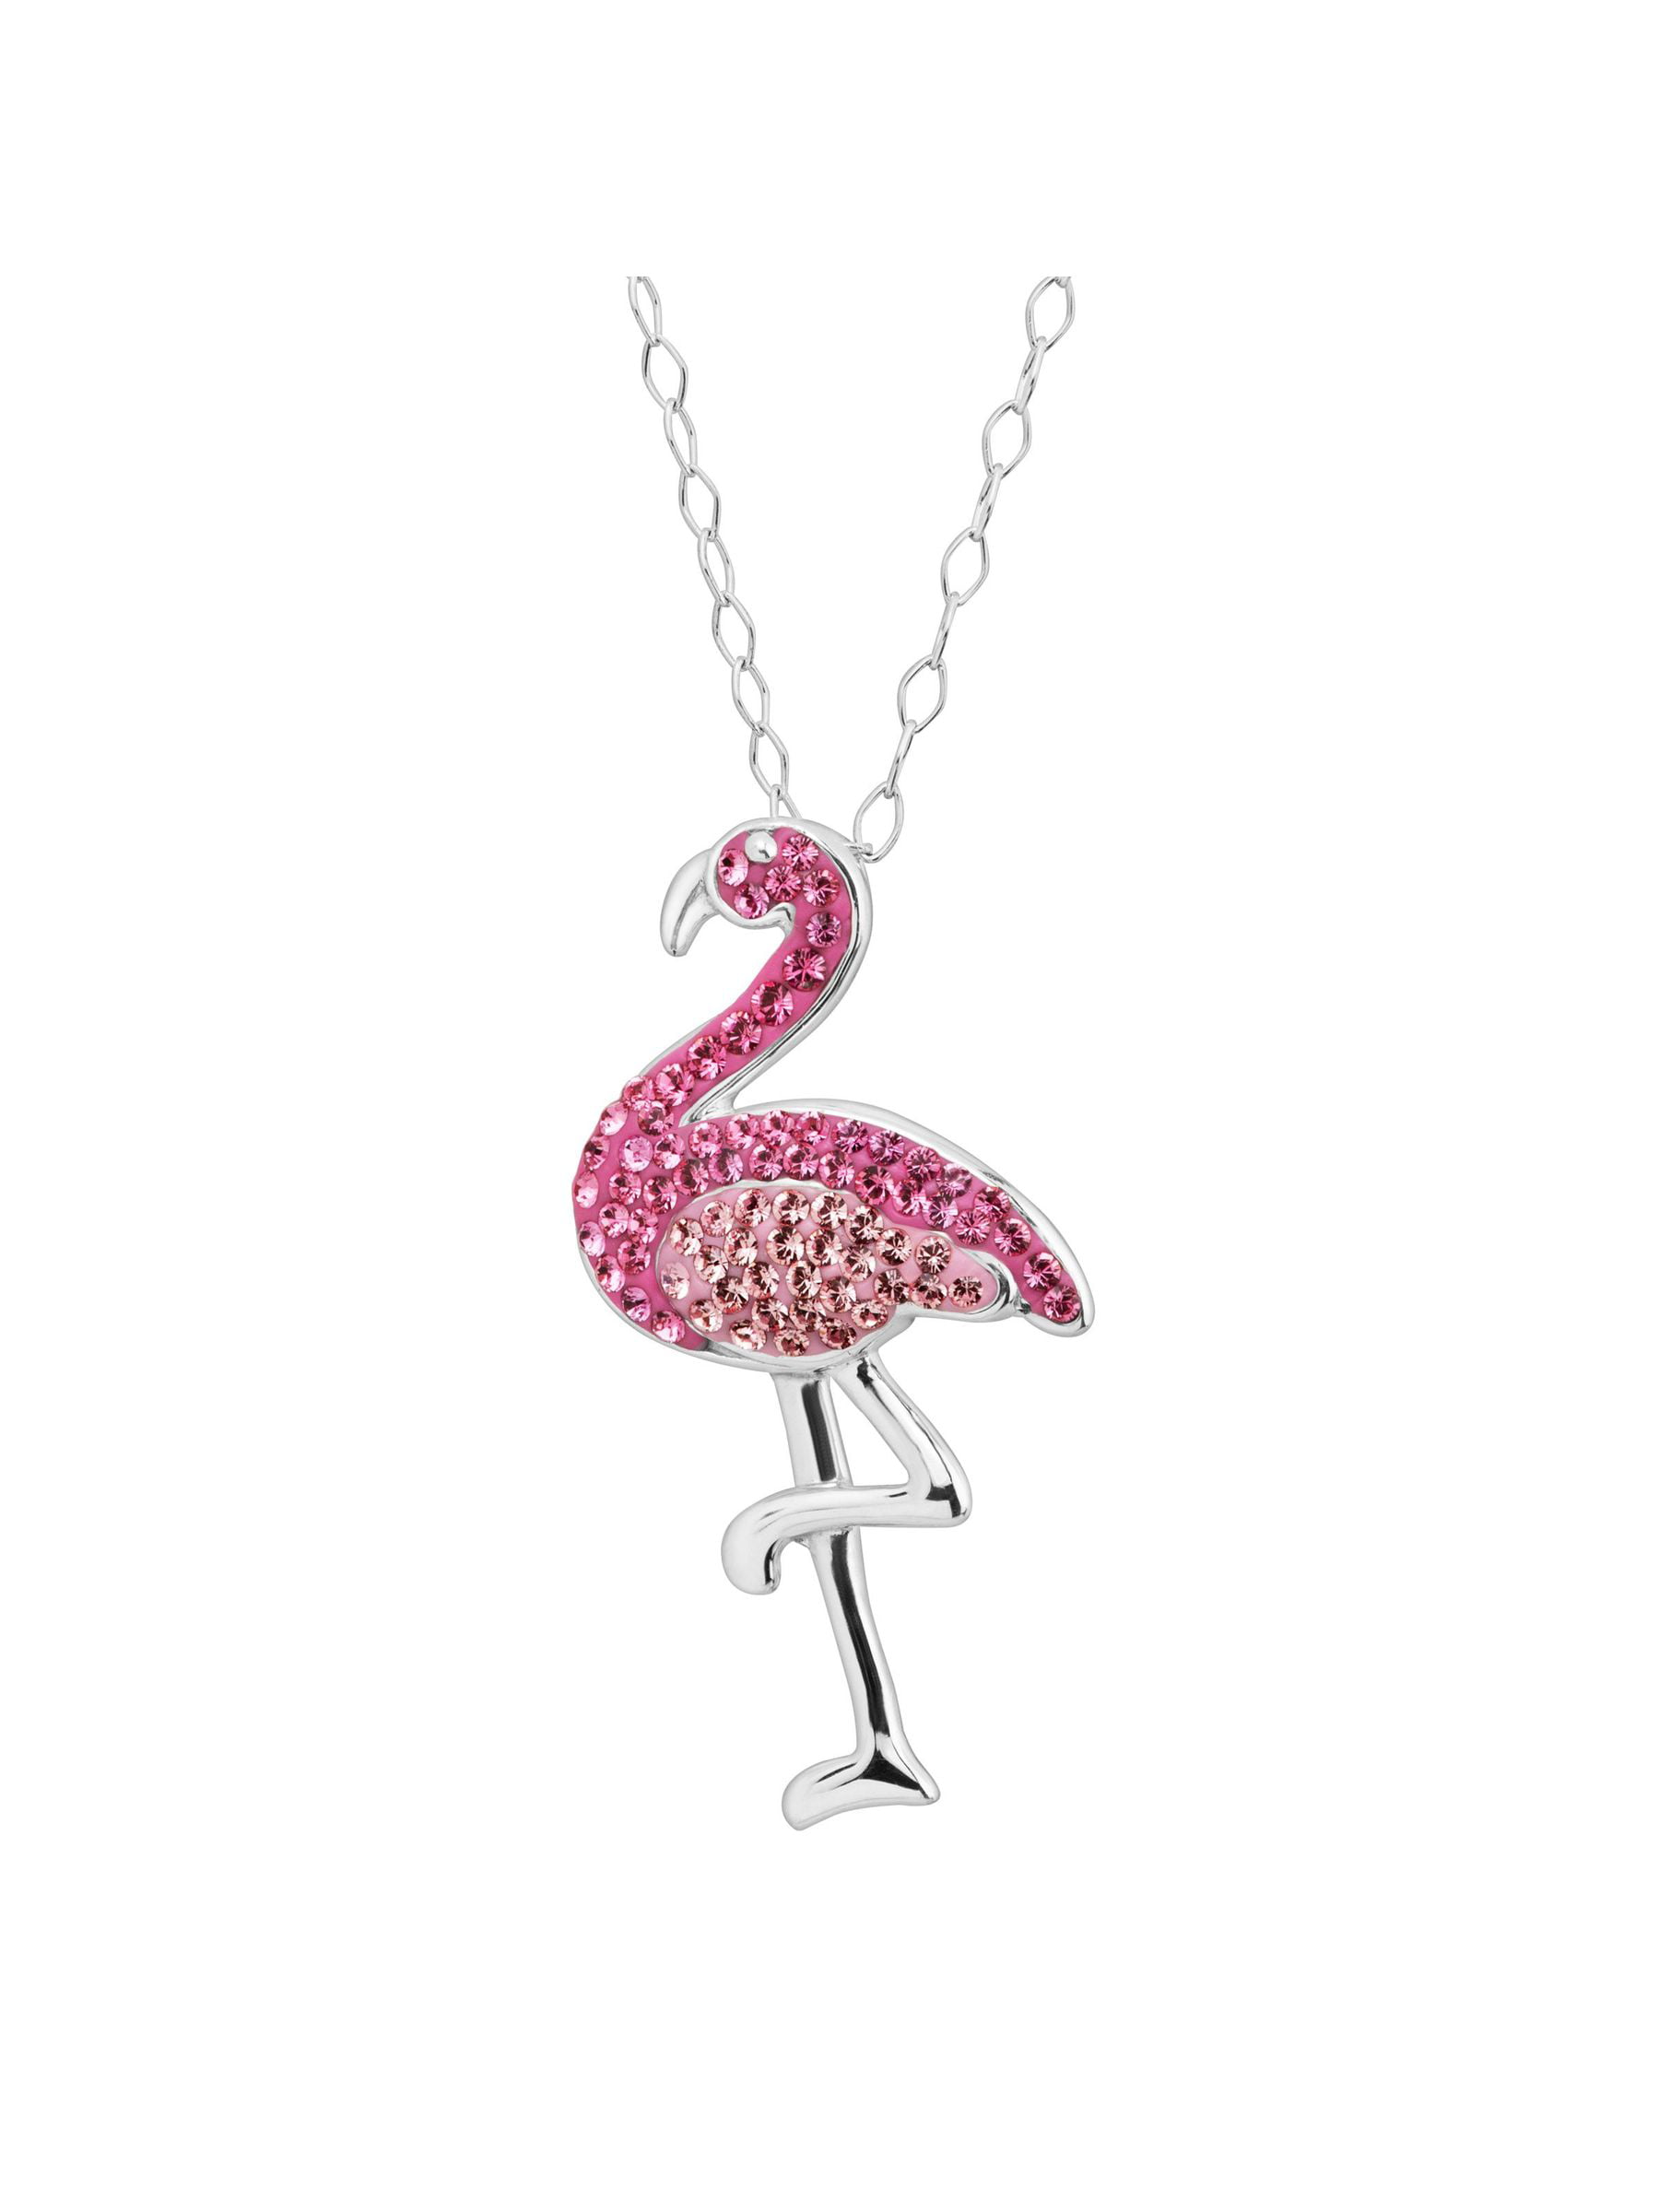 Flamingo Necklace Heart Engraved • Pink Flamingo Pendant • Flamingo Jewelry • Flamingo Gifts for Her • Dainty Rose Gold Bird Charm